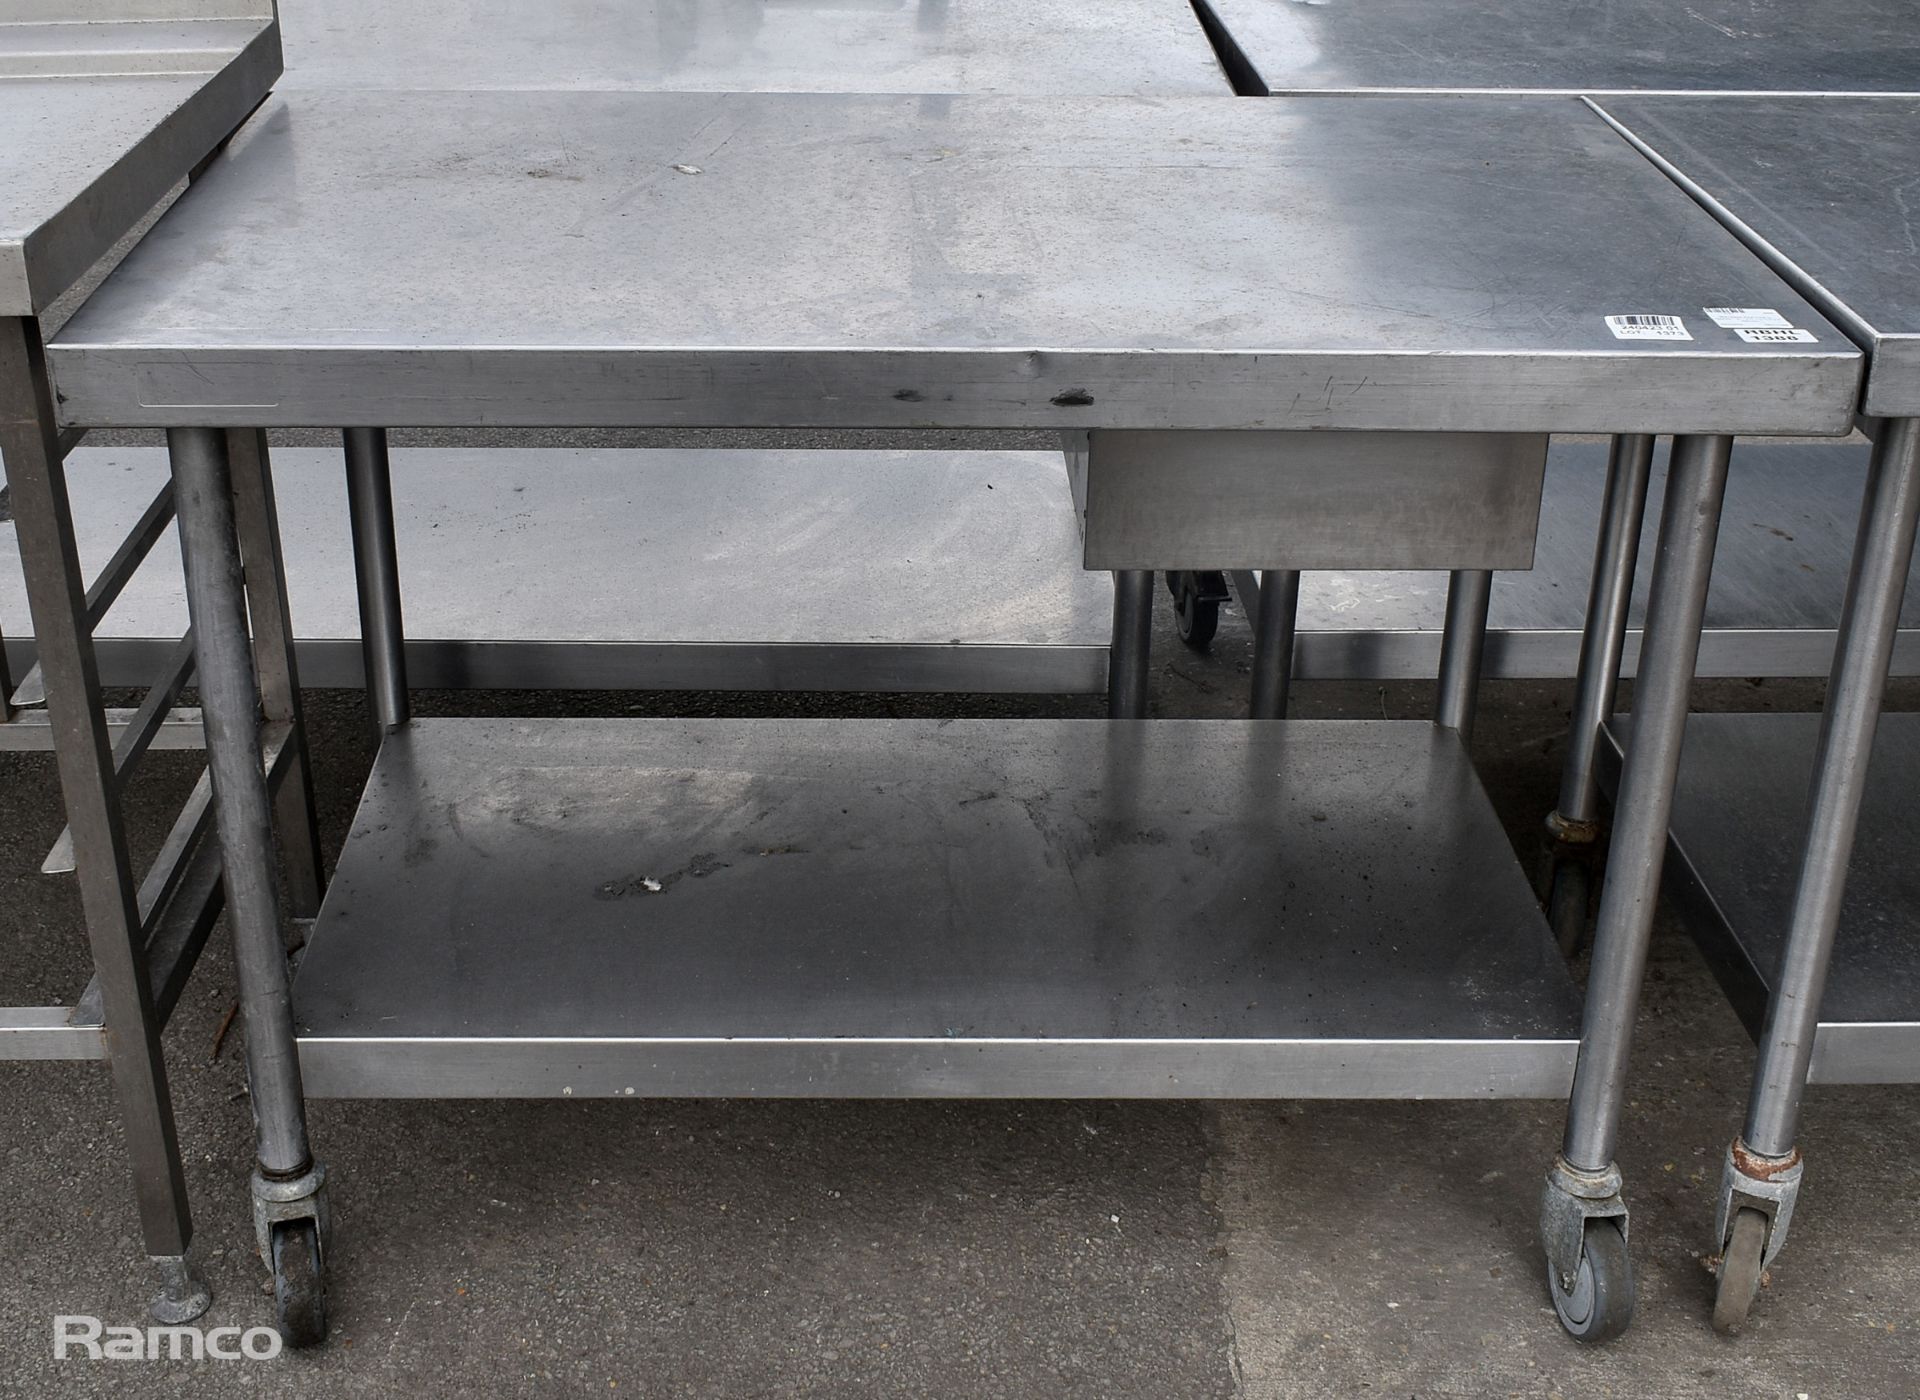 Stainless steel table on castors - W 1400 x D 700 x H 880mm